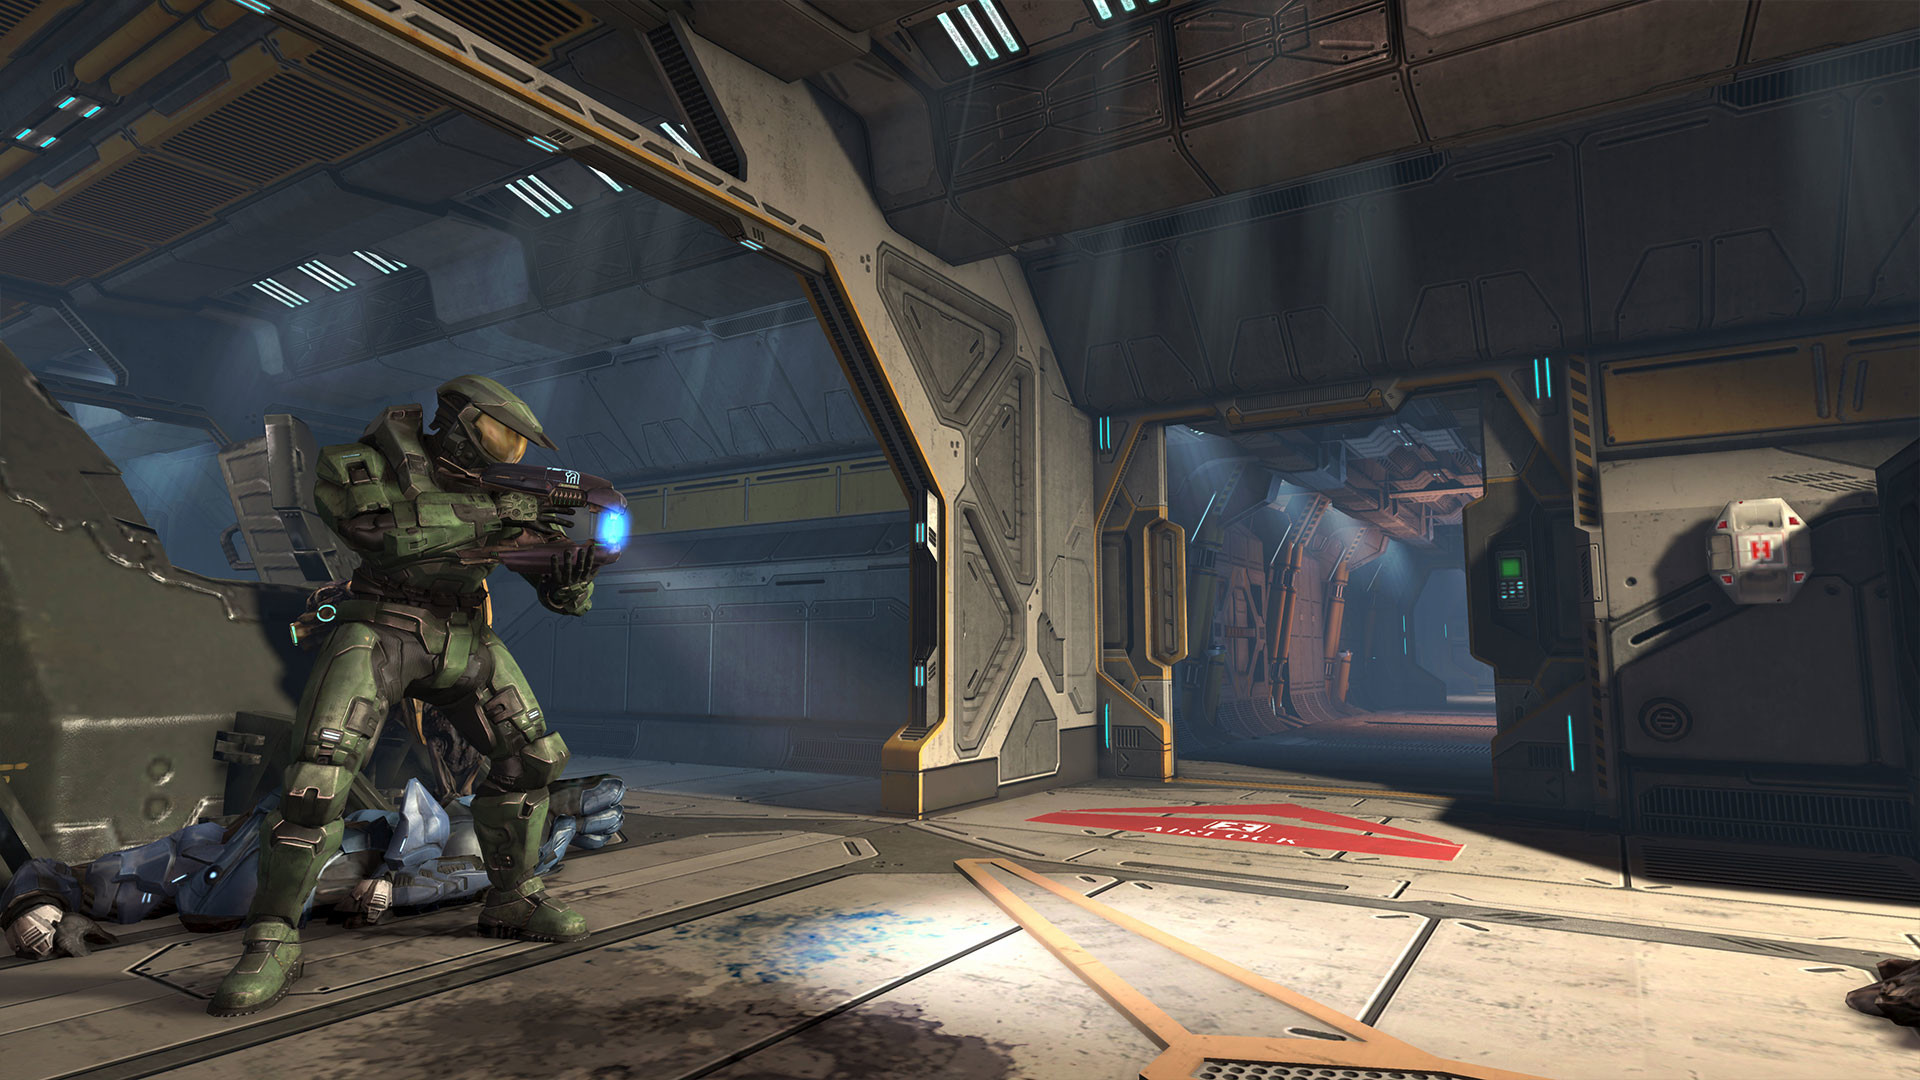 where to buy halo combat evolved pc